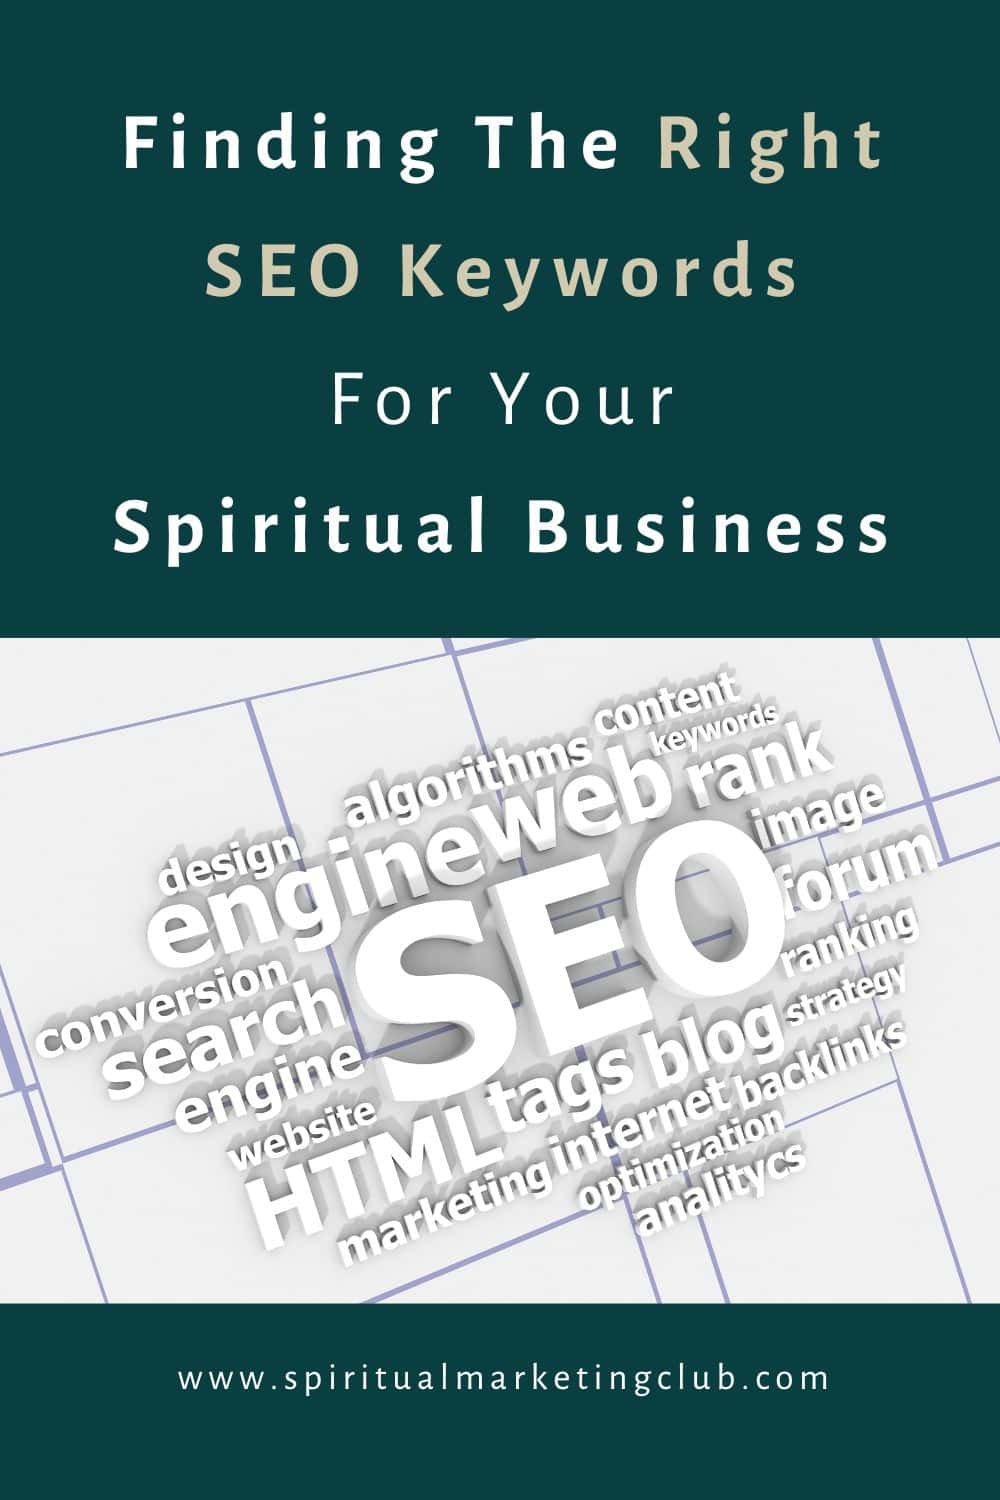 How To Find The Right SEO Keywords For Your Spiritual Business